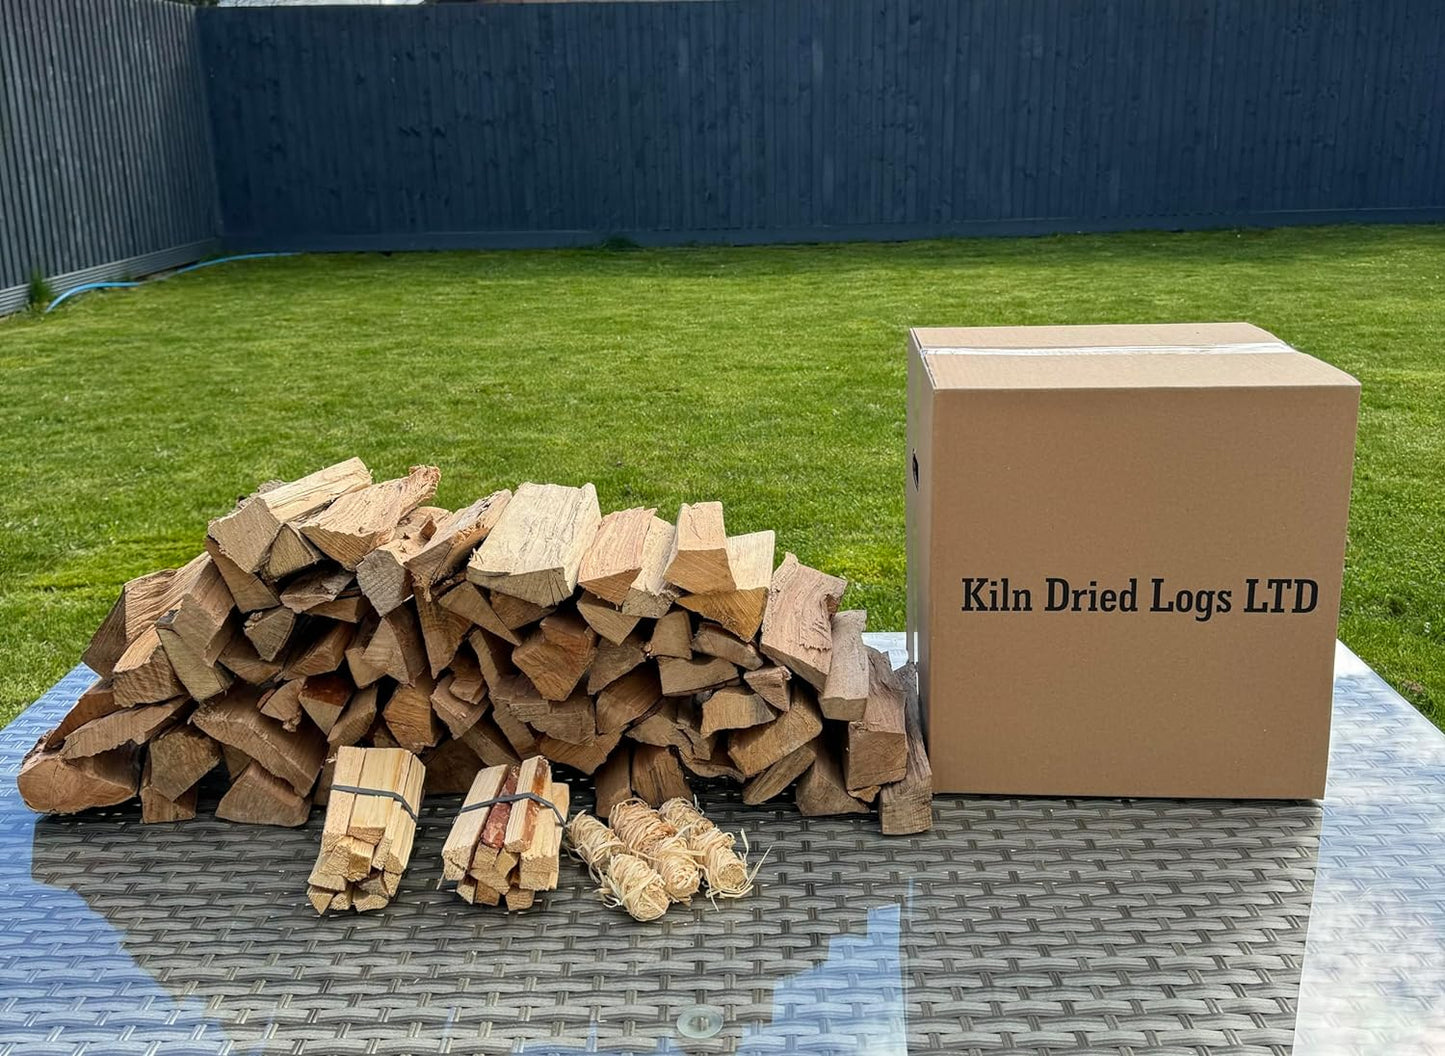 Barbecue Kiln Dried Hardwood Logs/Pizza Oven Logs/Firepits Logs/Outdoor Cooking Fuel 44 Litre Box